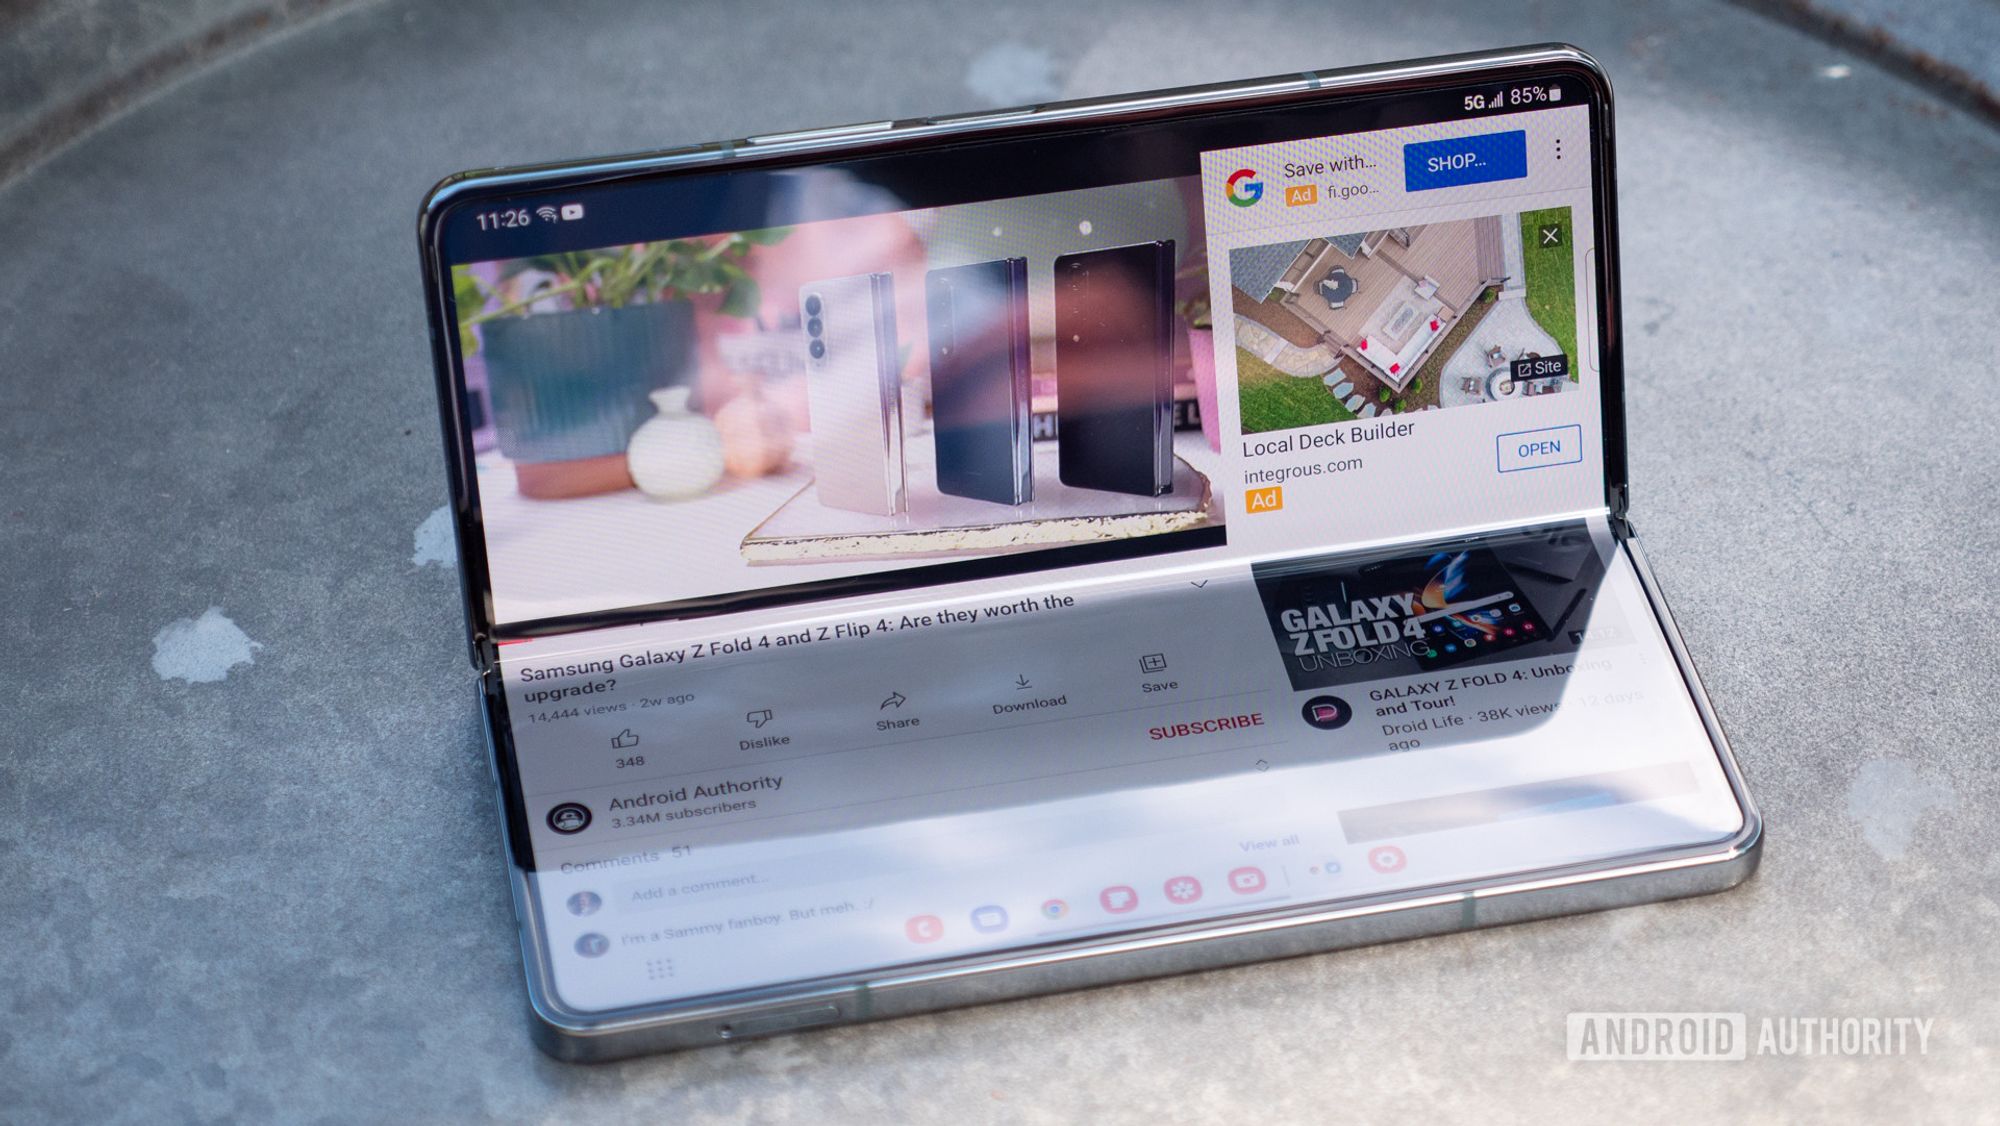 YouTube is reportedly slowing down videos for Firefox users (Update: Statement)